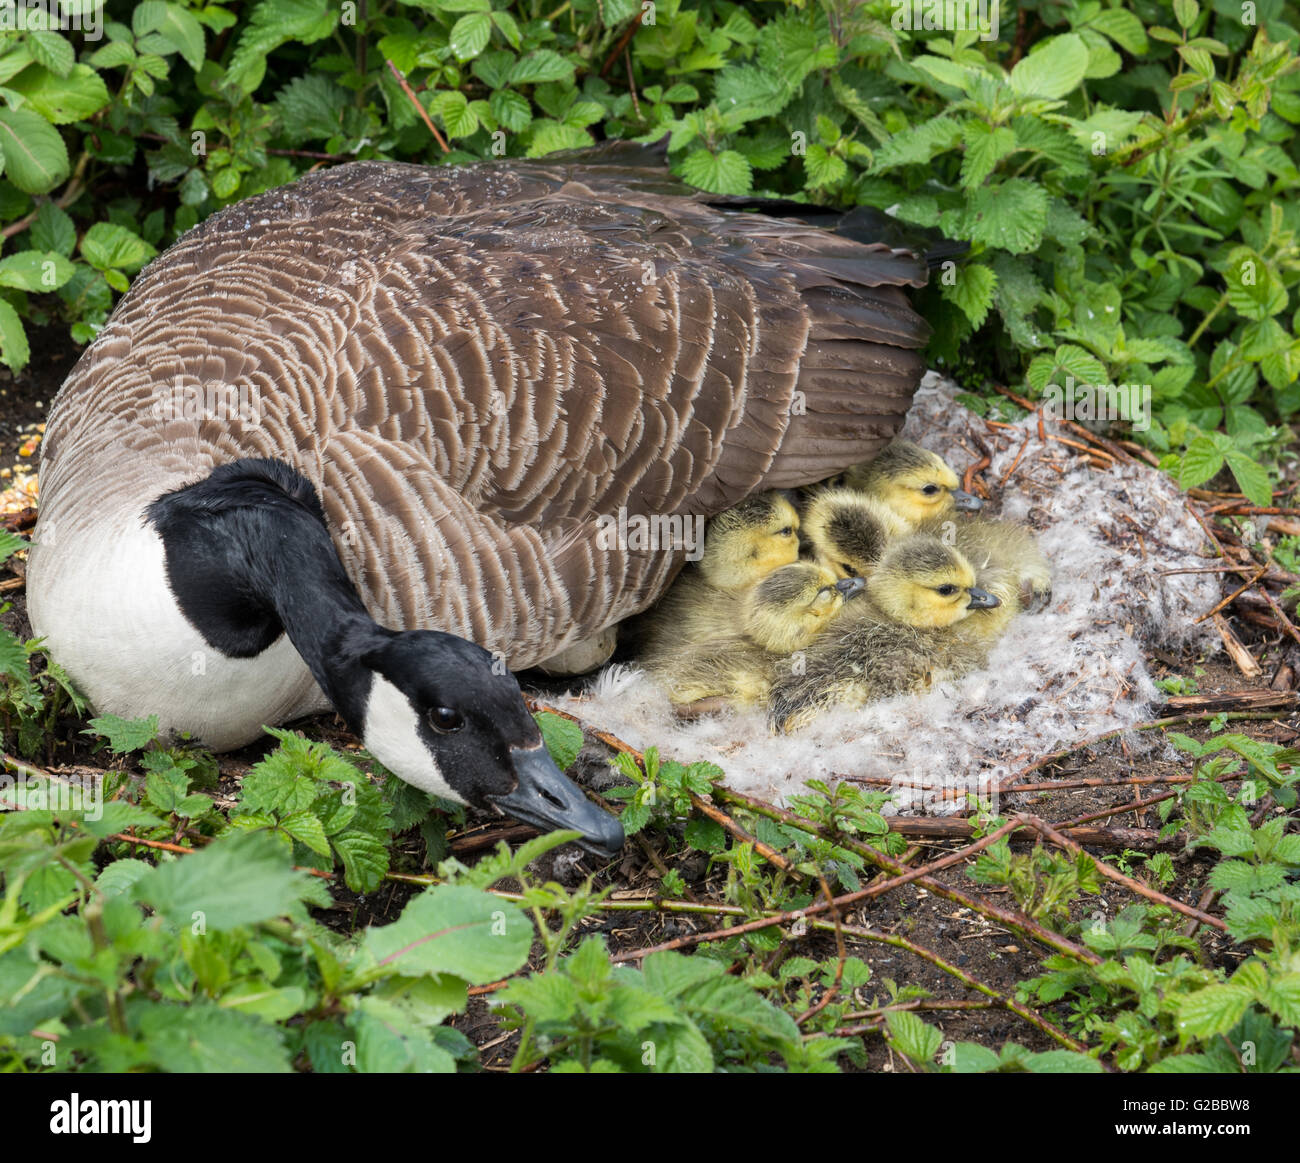 canadian-goose-protecting-her-young-G2BB